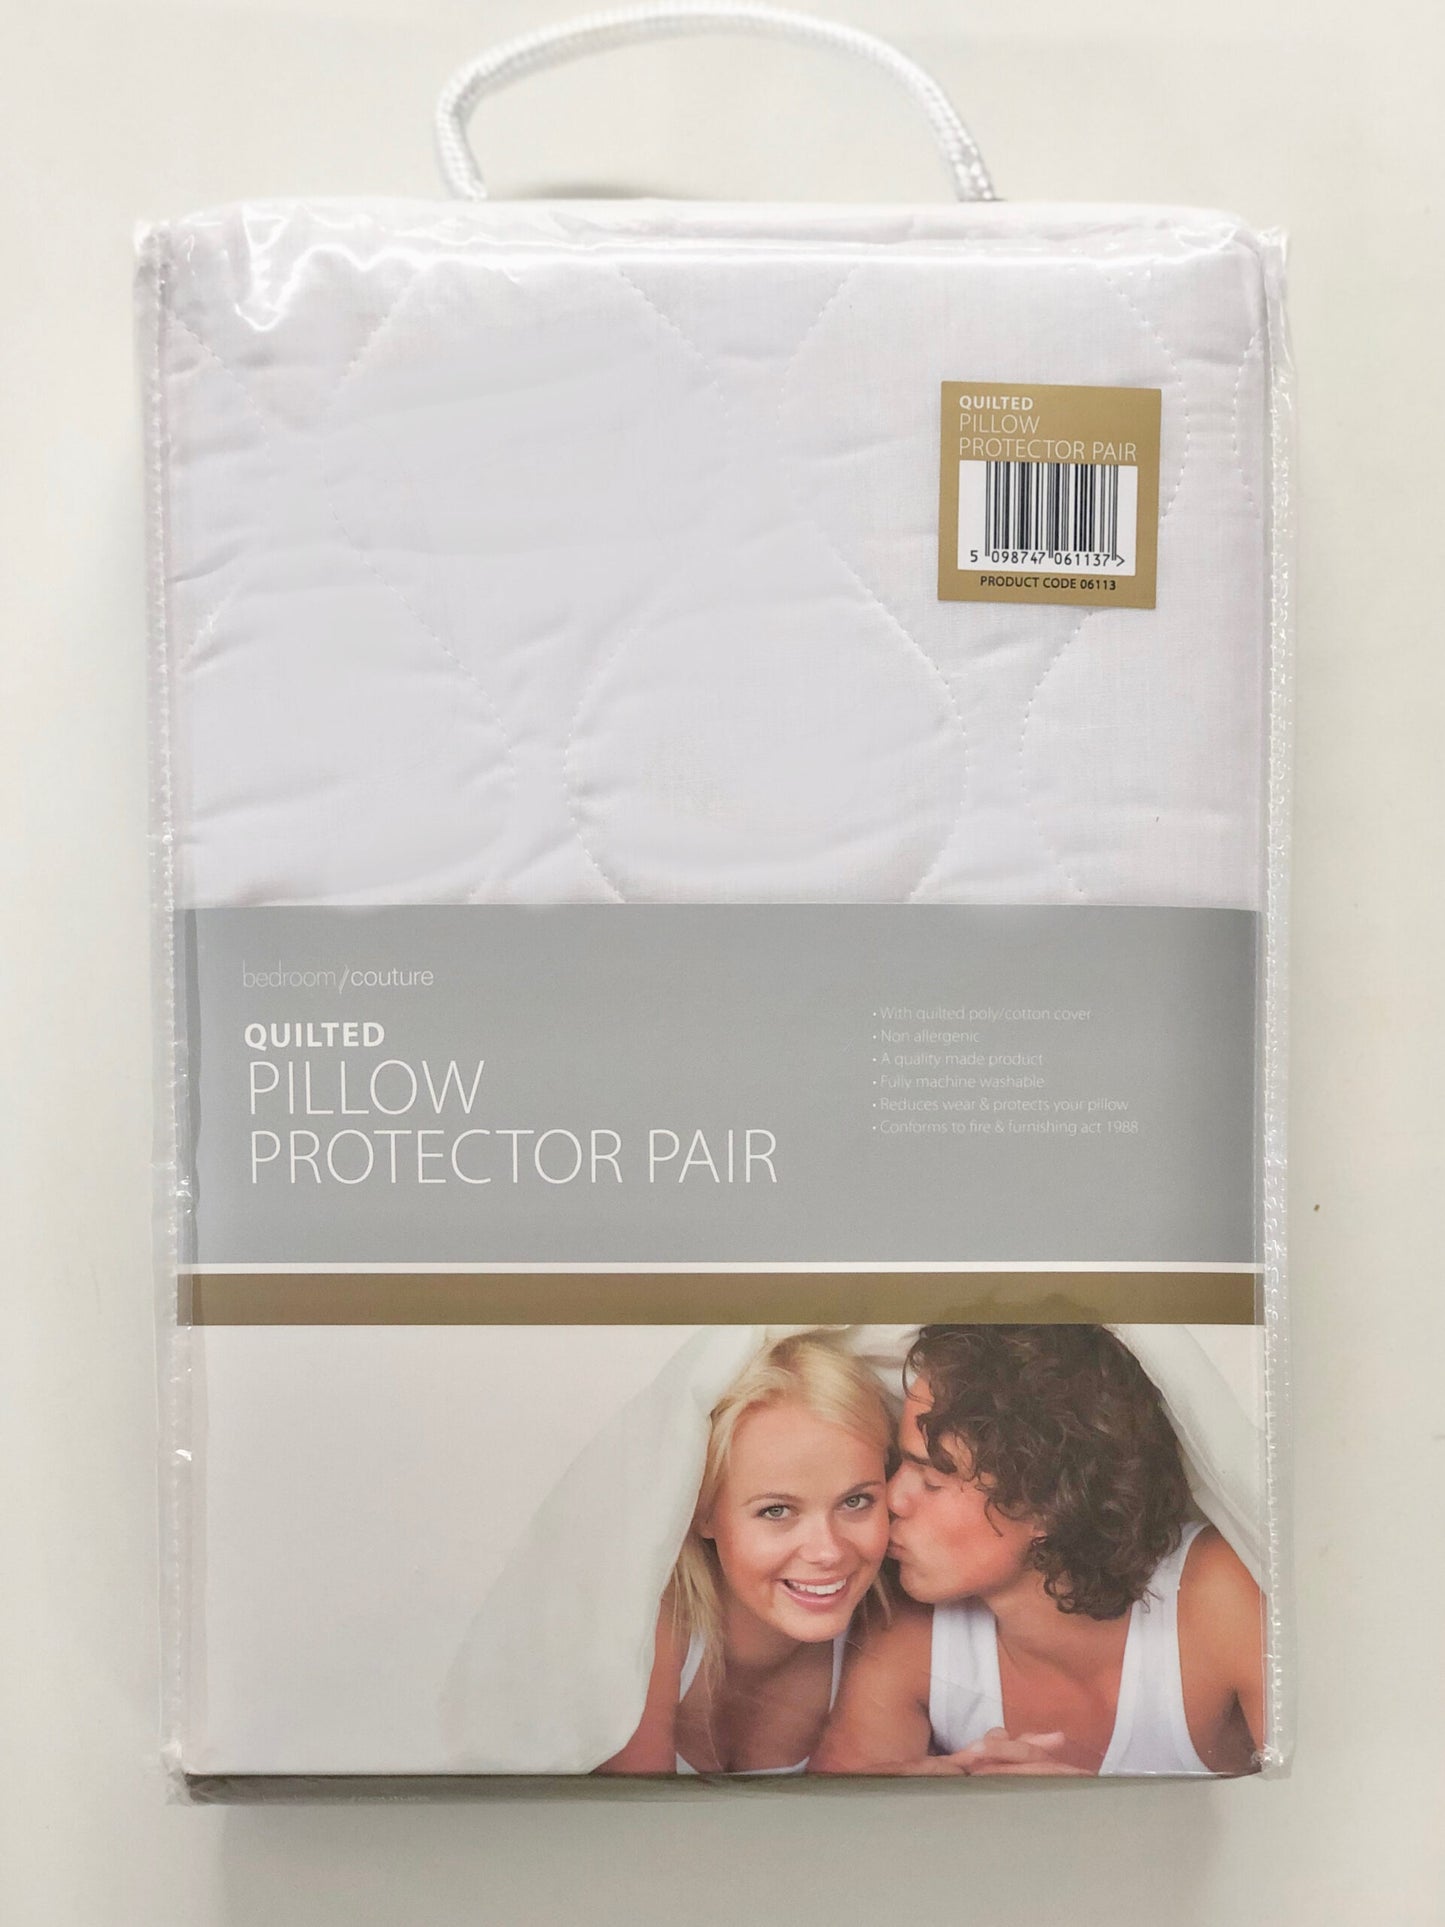 QUILTED PILLOW PROTECTOR PAIR